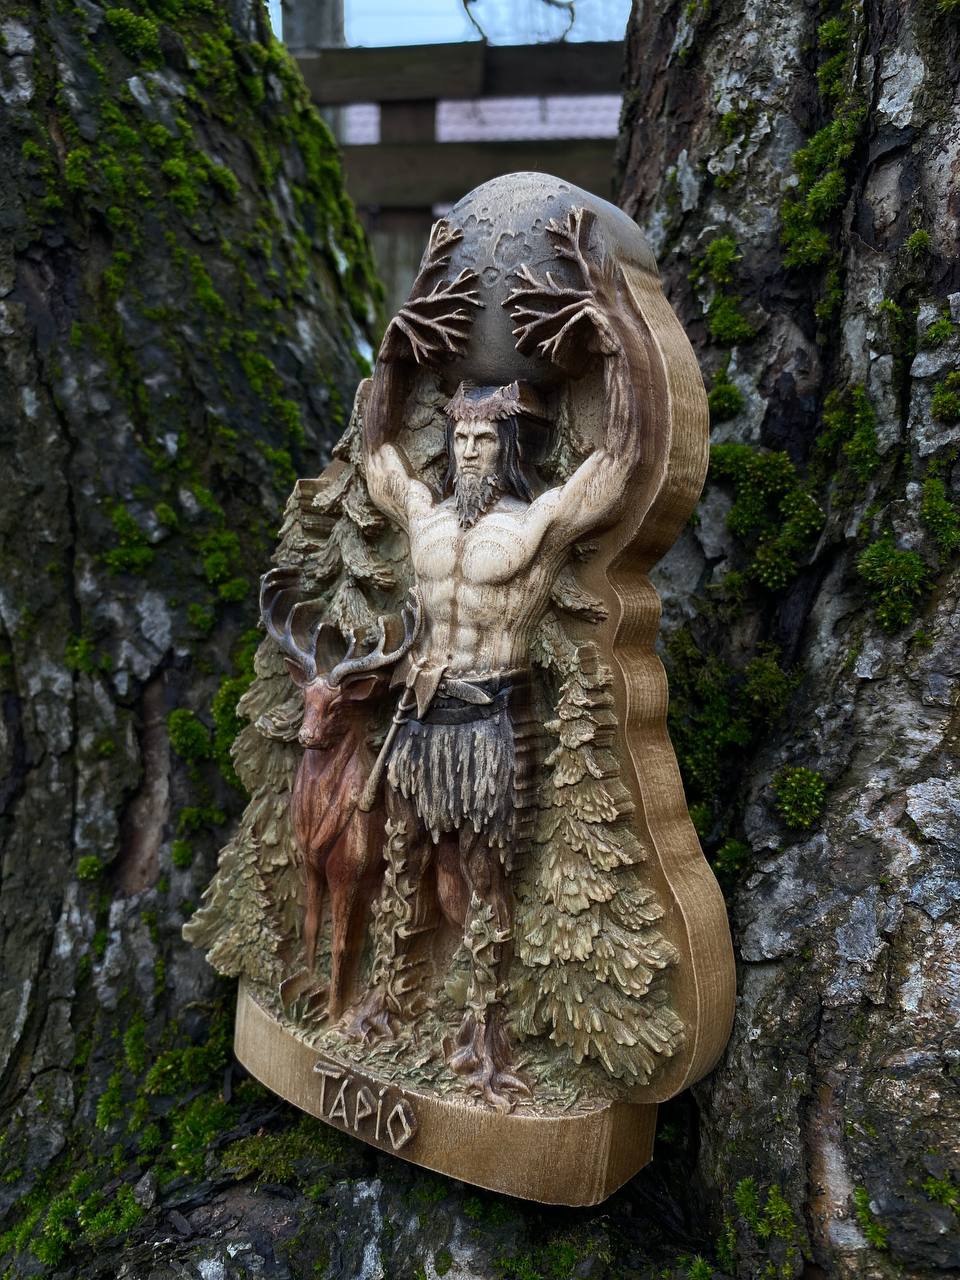 Tapio, Horned god, Lord of the forest, Norse mythology Wood carving